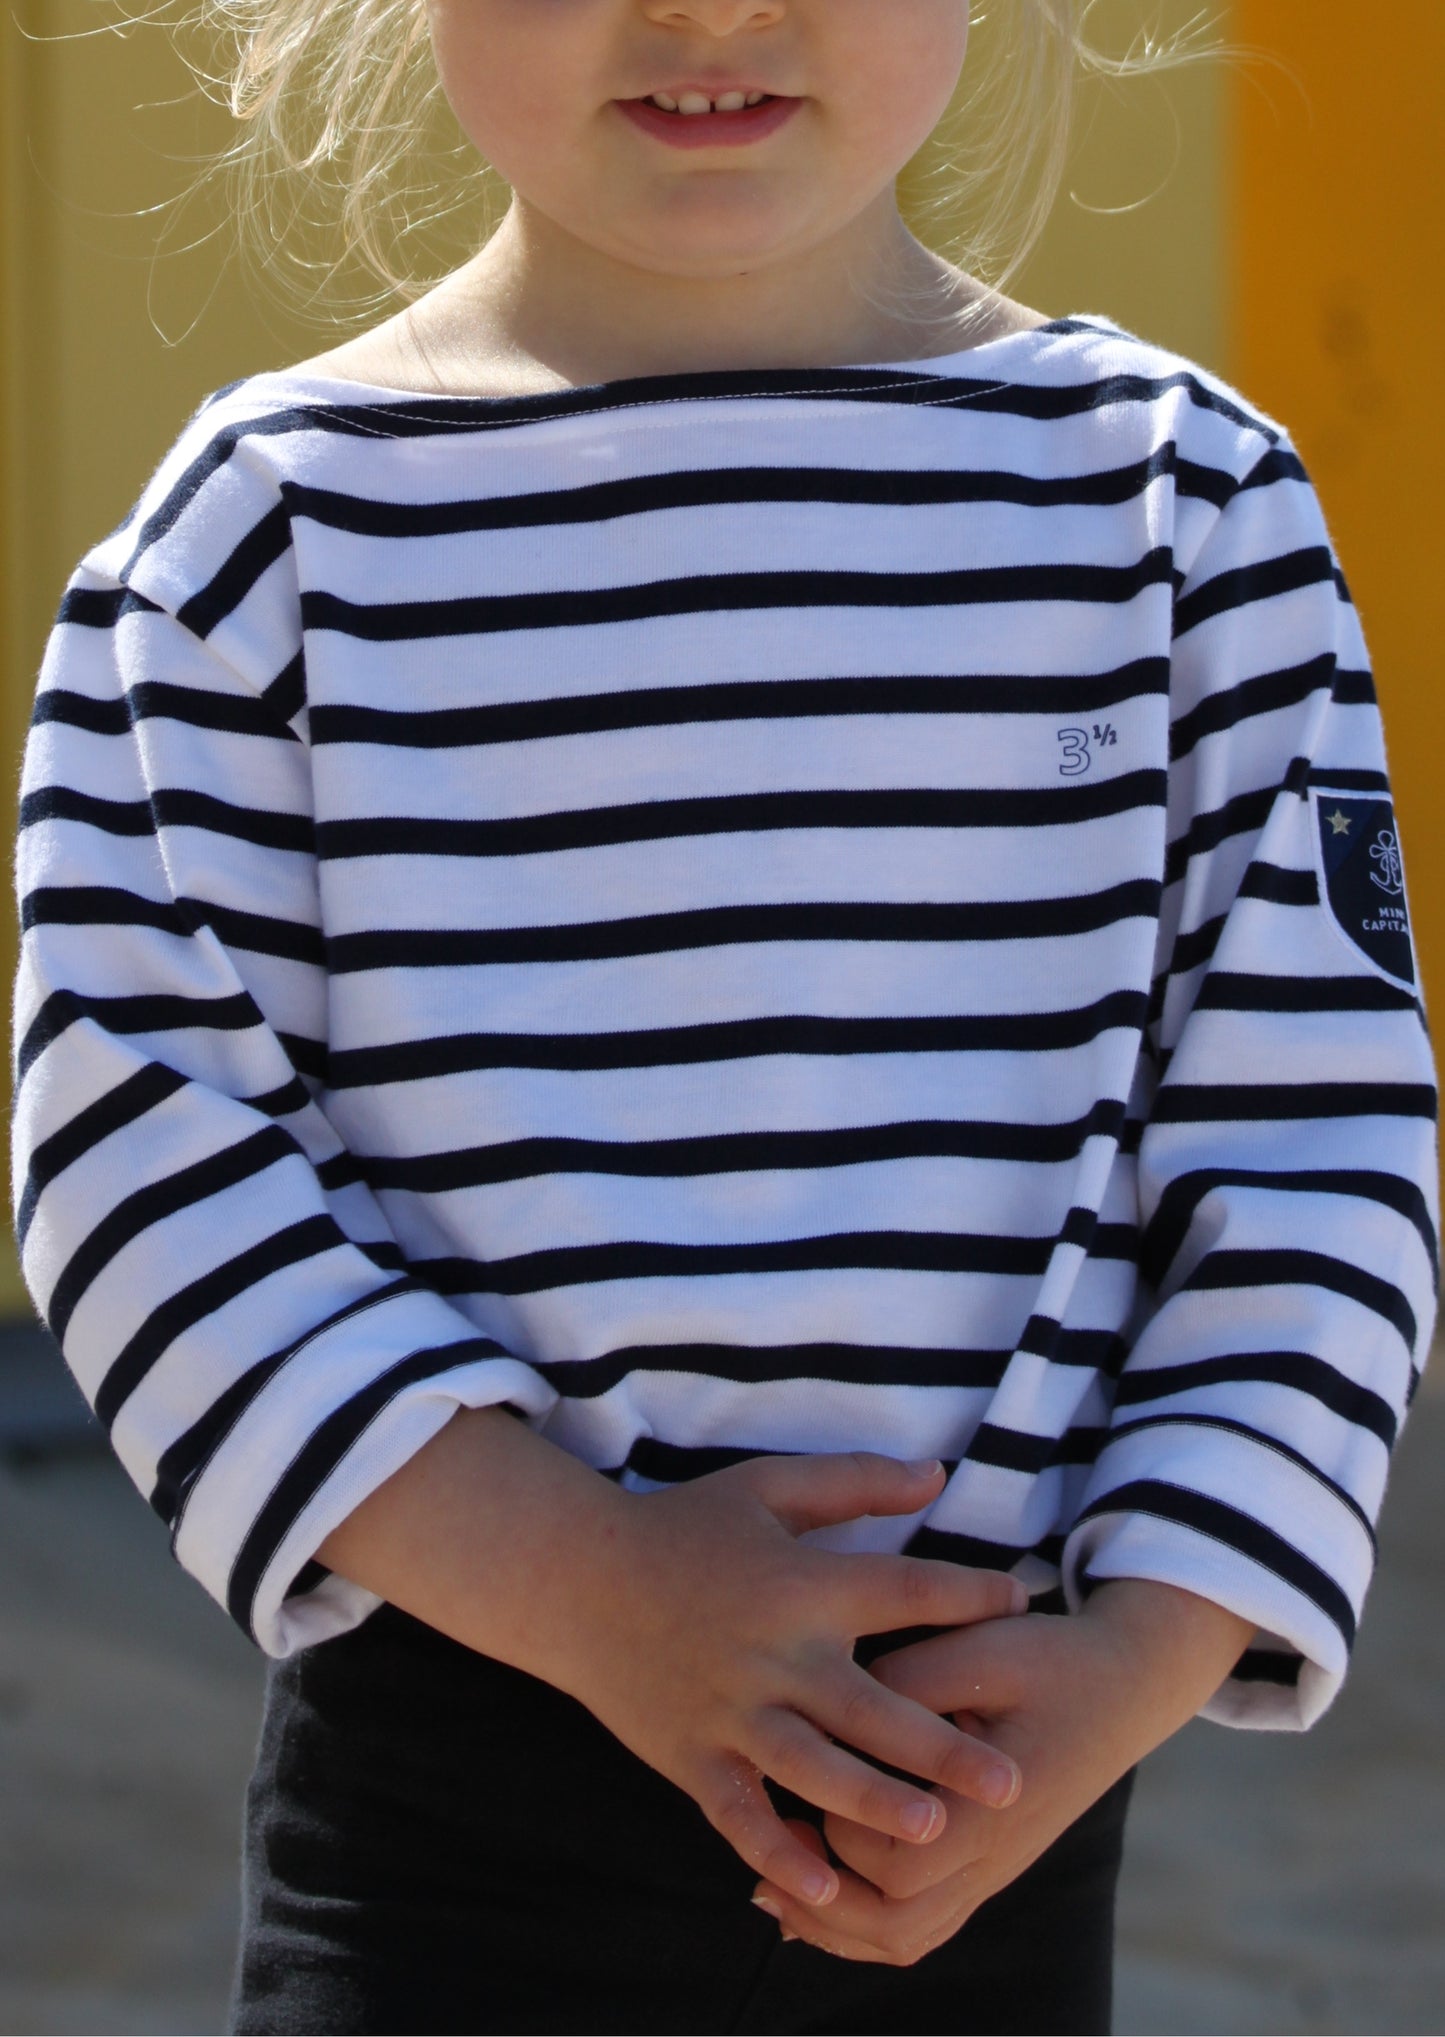 Children's organic cotton sailor shirt HAPPY ET D'EMIE embroidered from 1A1/2 to 11A1/2 - Half anniversary collection 🇫🇷